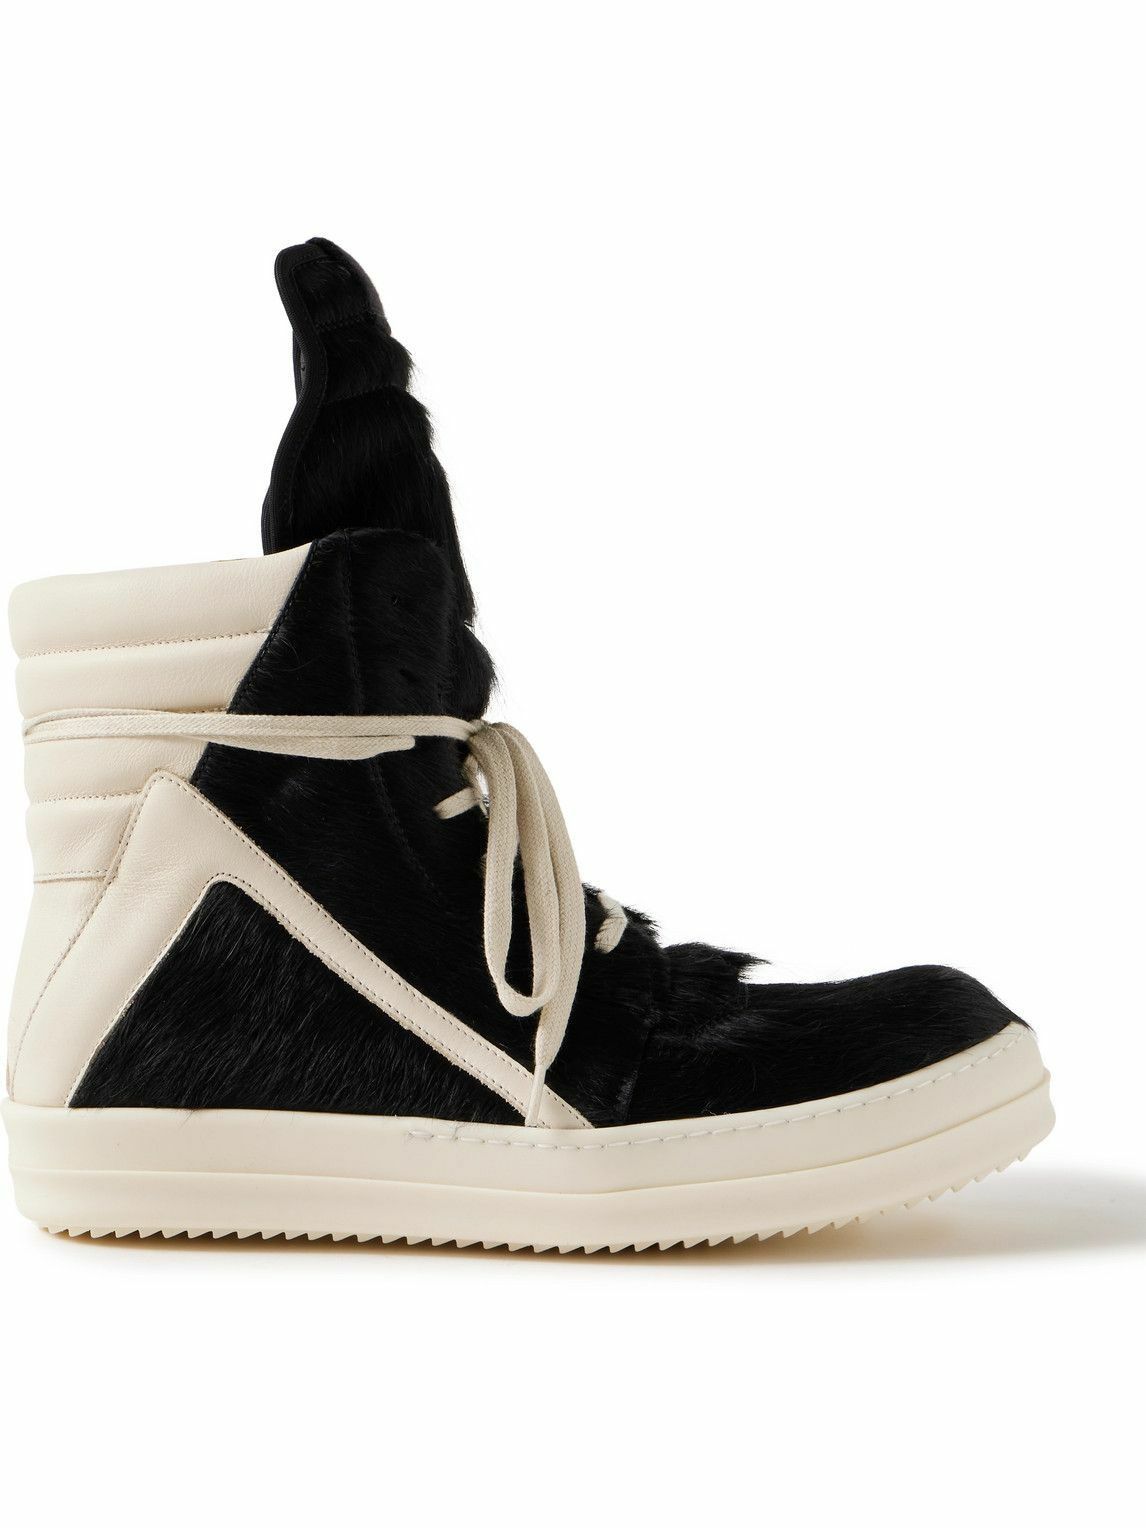 Photo: Rick Owens - Geobasket Calf Hair and Leather High-Top Sneakers - Black